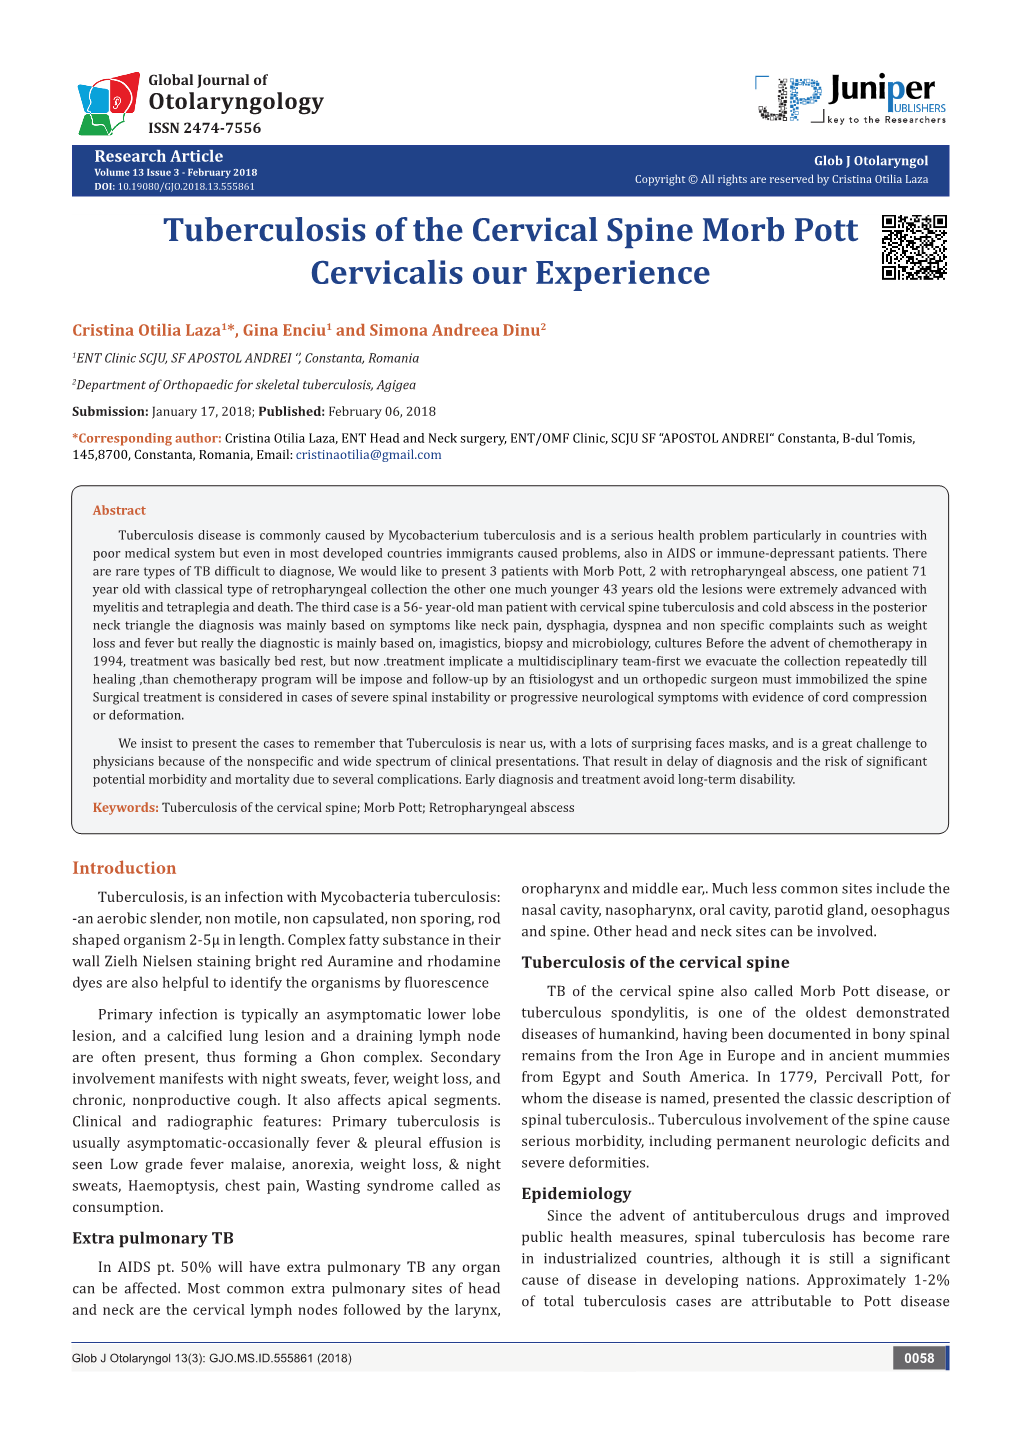 Tuberculosis of the Cervical Spine Morb Pott Cervicalis Our Experience